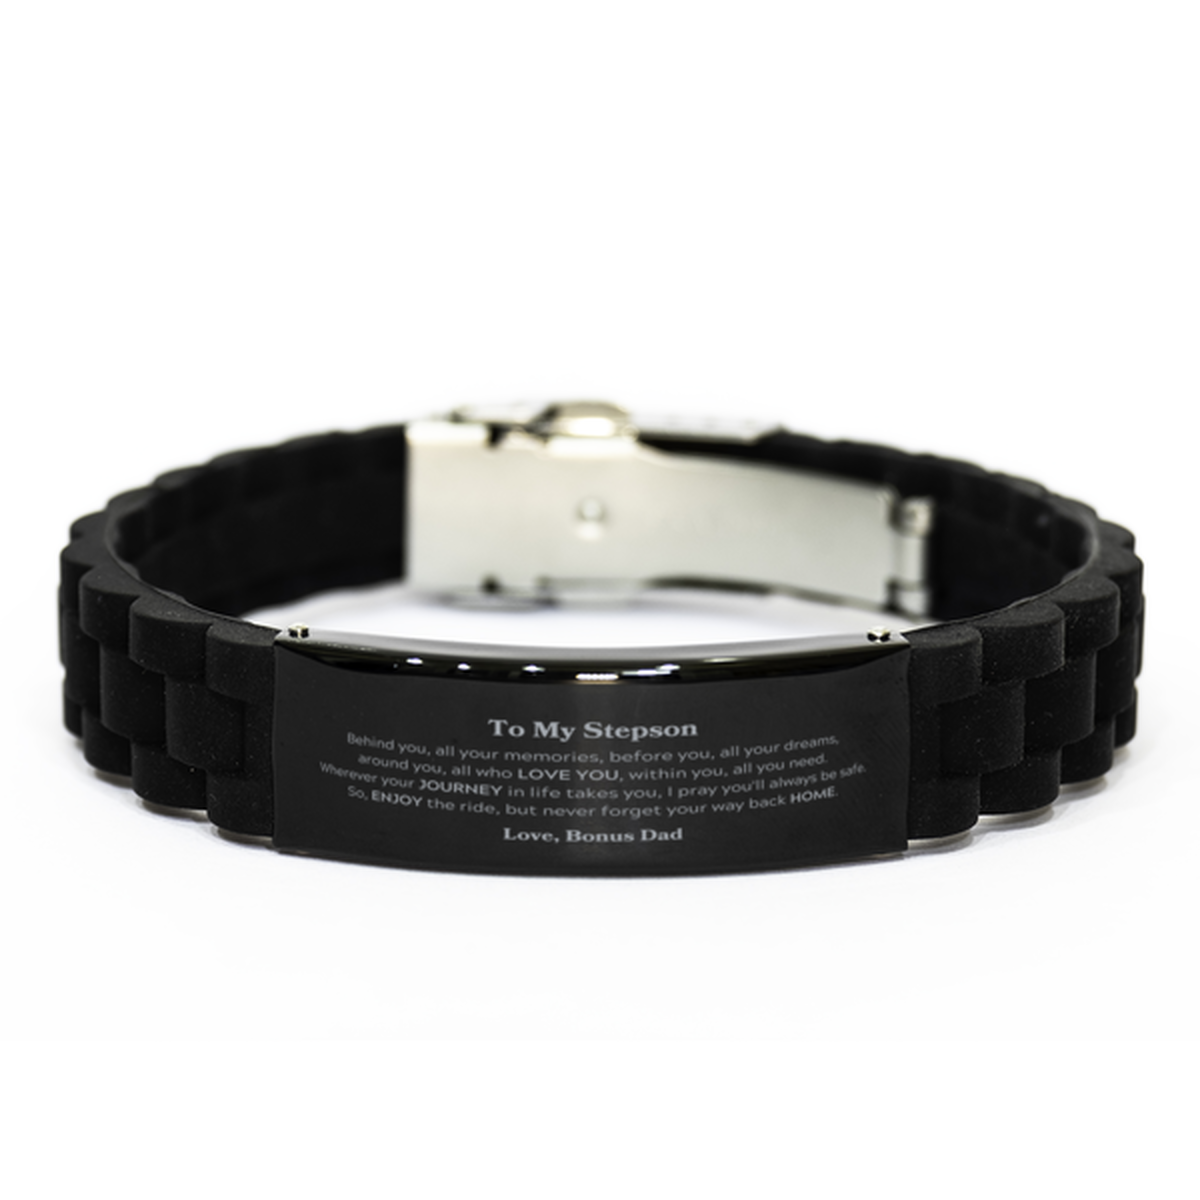 To My Stepson Graduation Gifts from Bonus Dad, Stepson Black Glidelock Clasp Bracelet Christmas Birthday Gifts for Stepson Behind you, all your memories, before you, all your dreams. Love, Bonus Dad